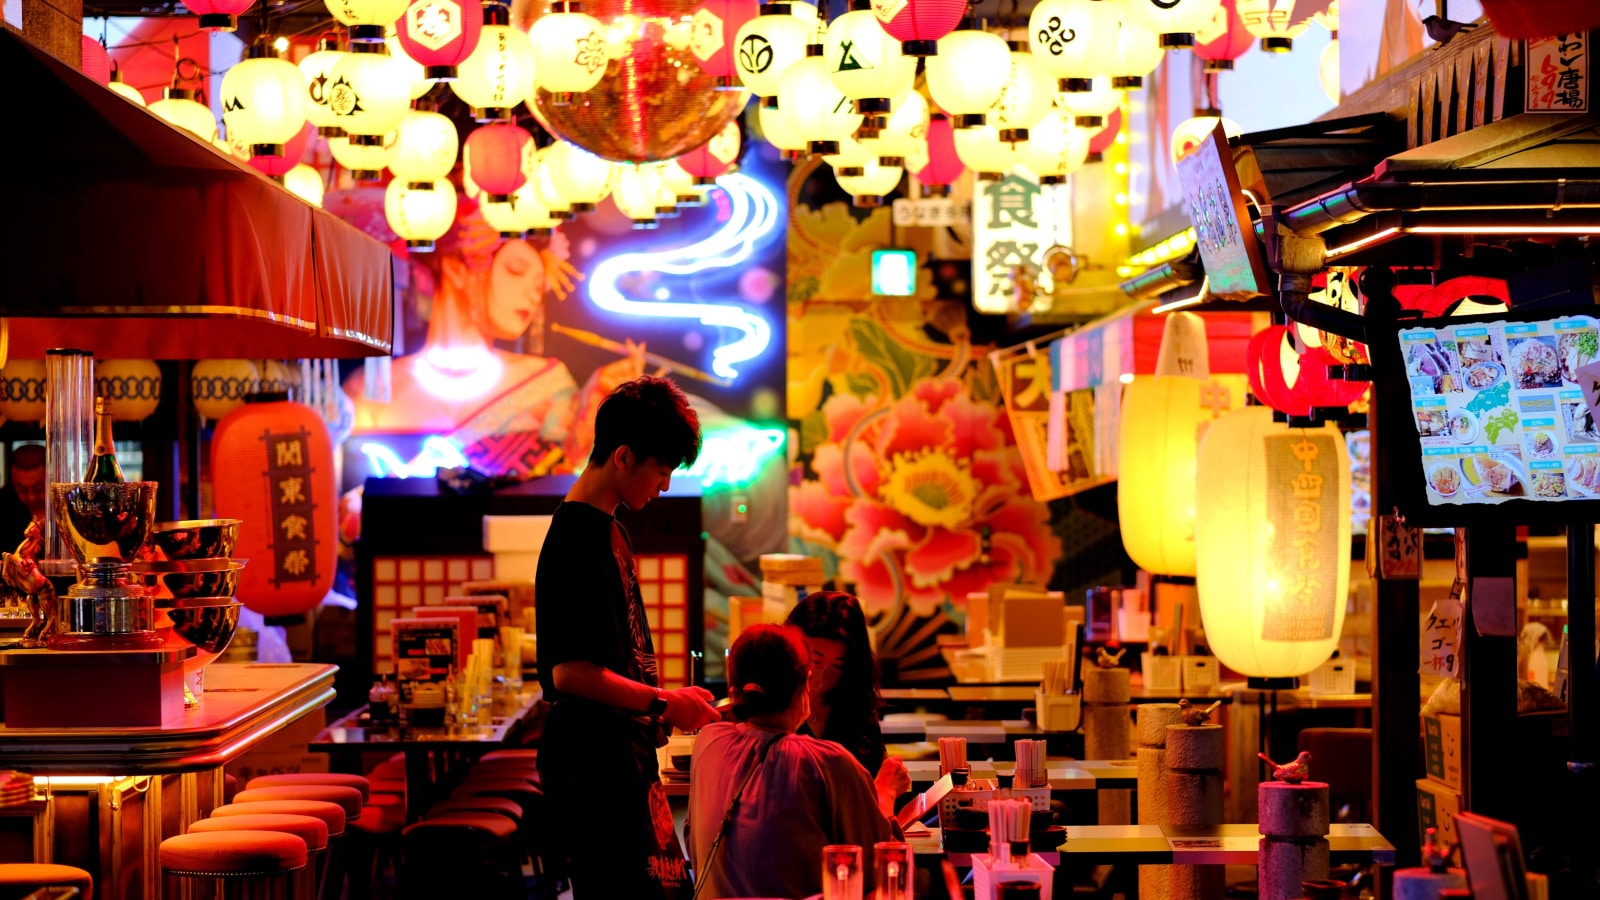 <p>Visitors and foreigners usually look for five-star hotels and restaurants for good food. But it is less common to know that the departmental stores have good food courts in their basements. These food courts are not only good in taste, but also can be budget-friendly. Any visitor can entertain themselves with great food on a cheap budget there.</p>